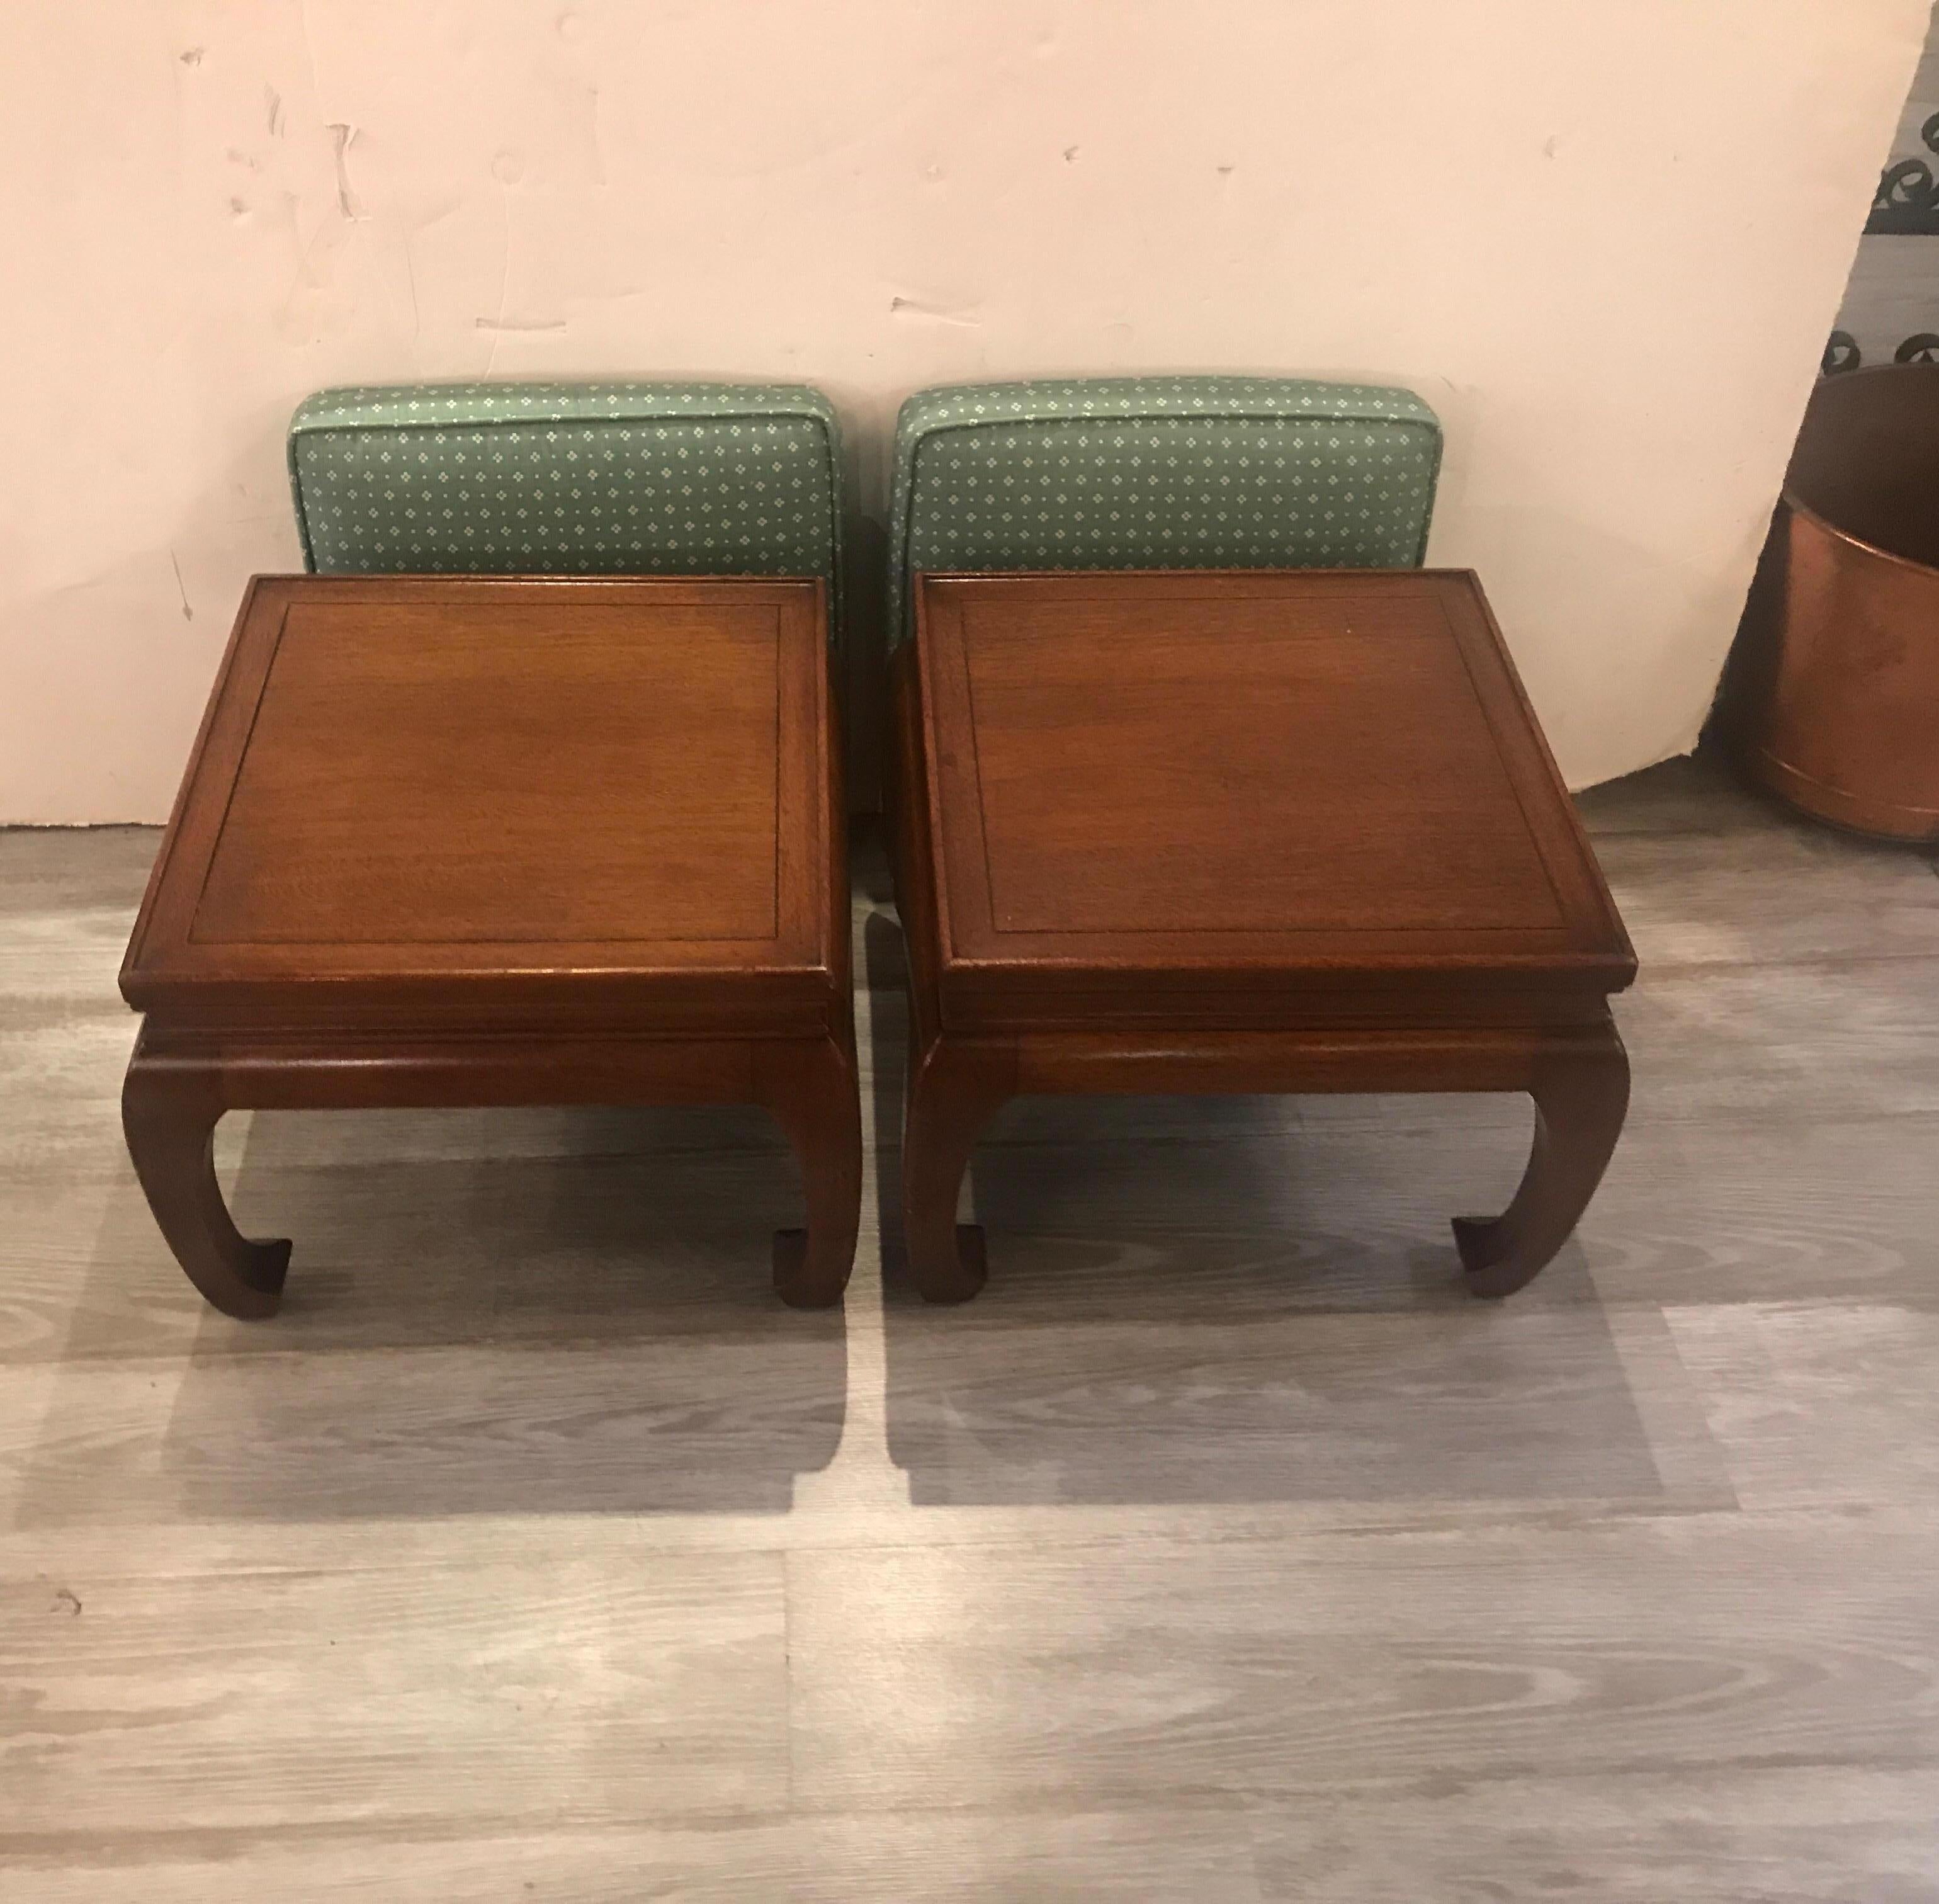 Pair of Asian Style Benches or Stands (20. Jahrhundert)